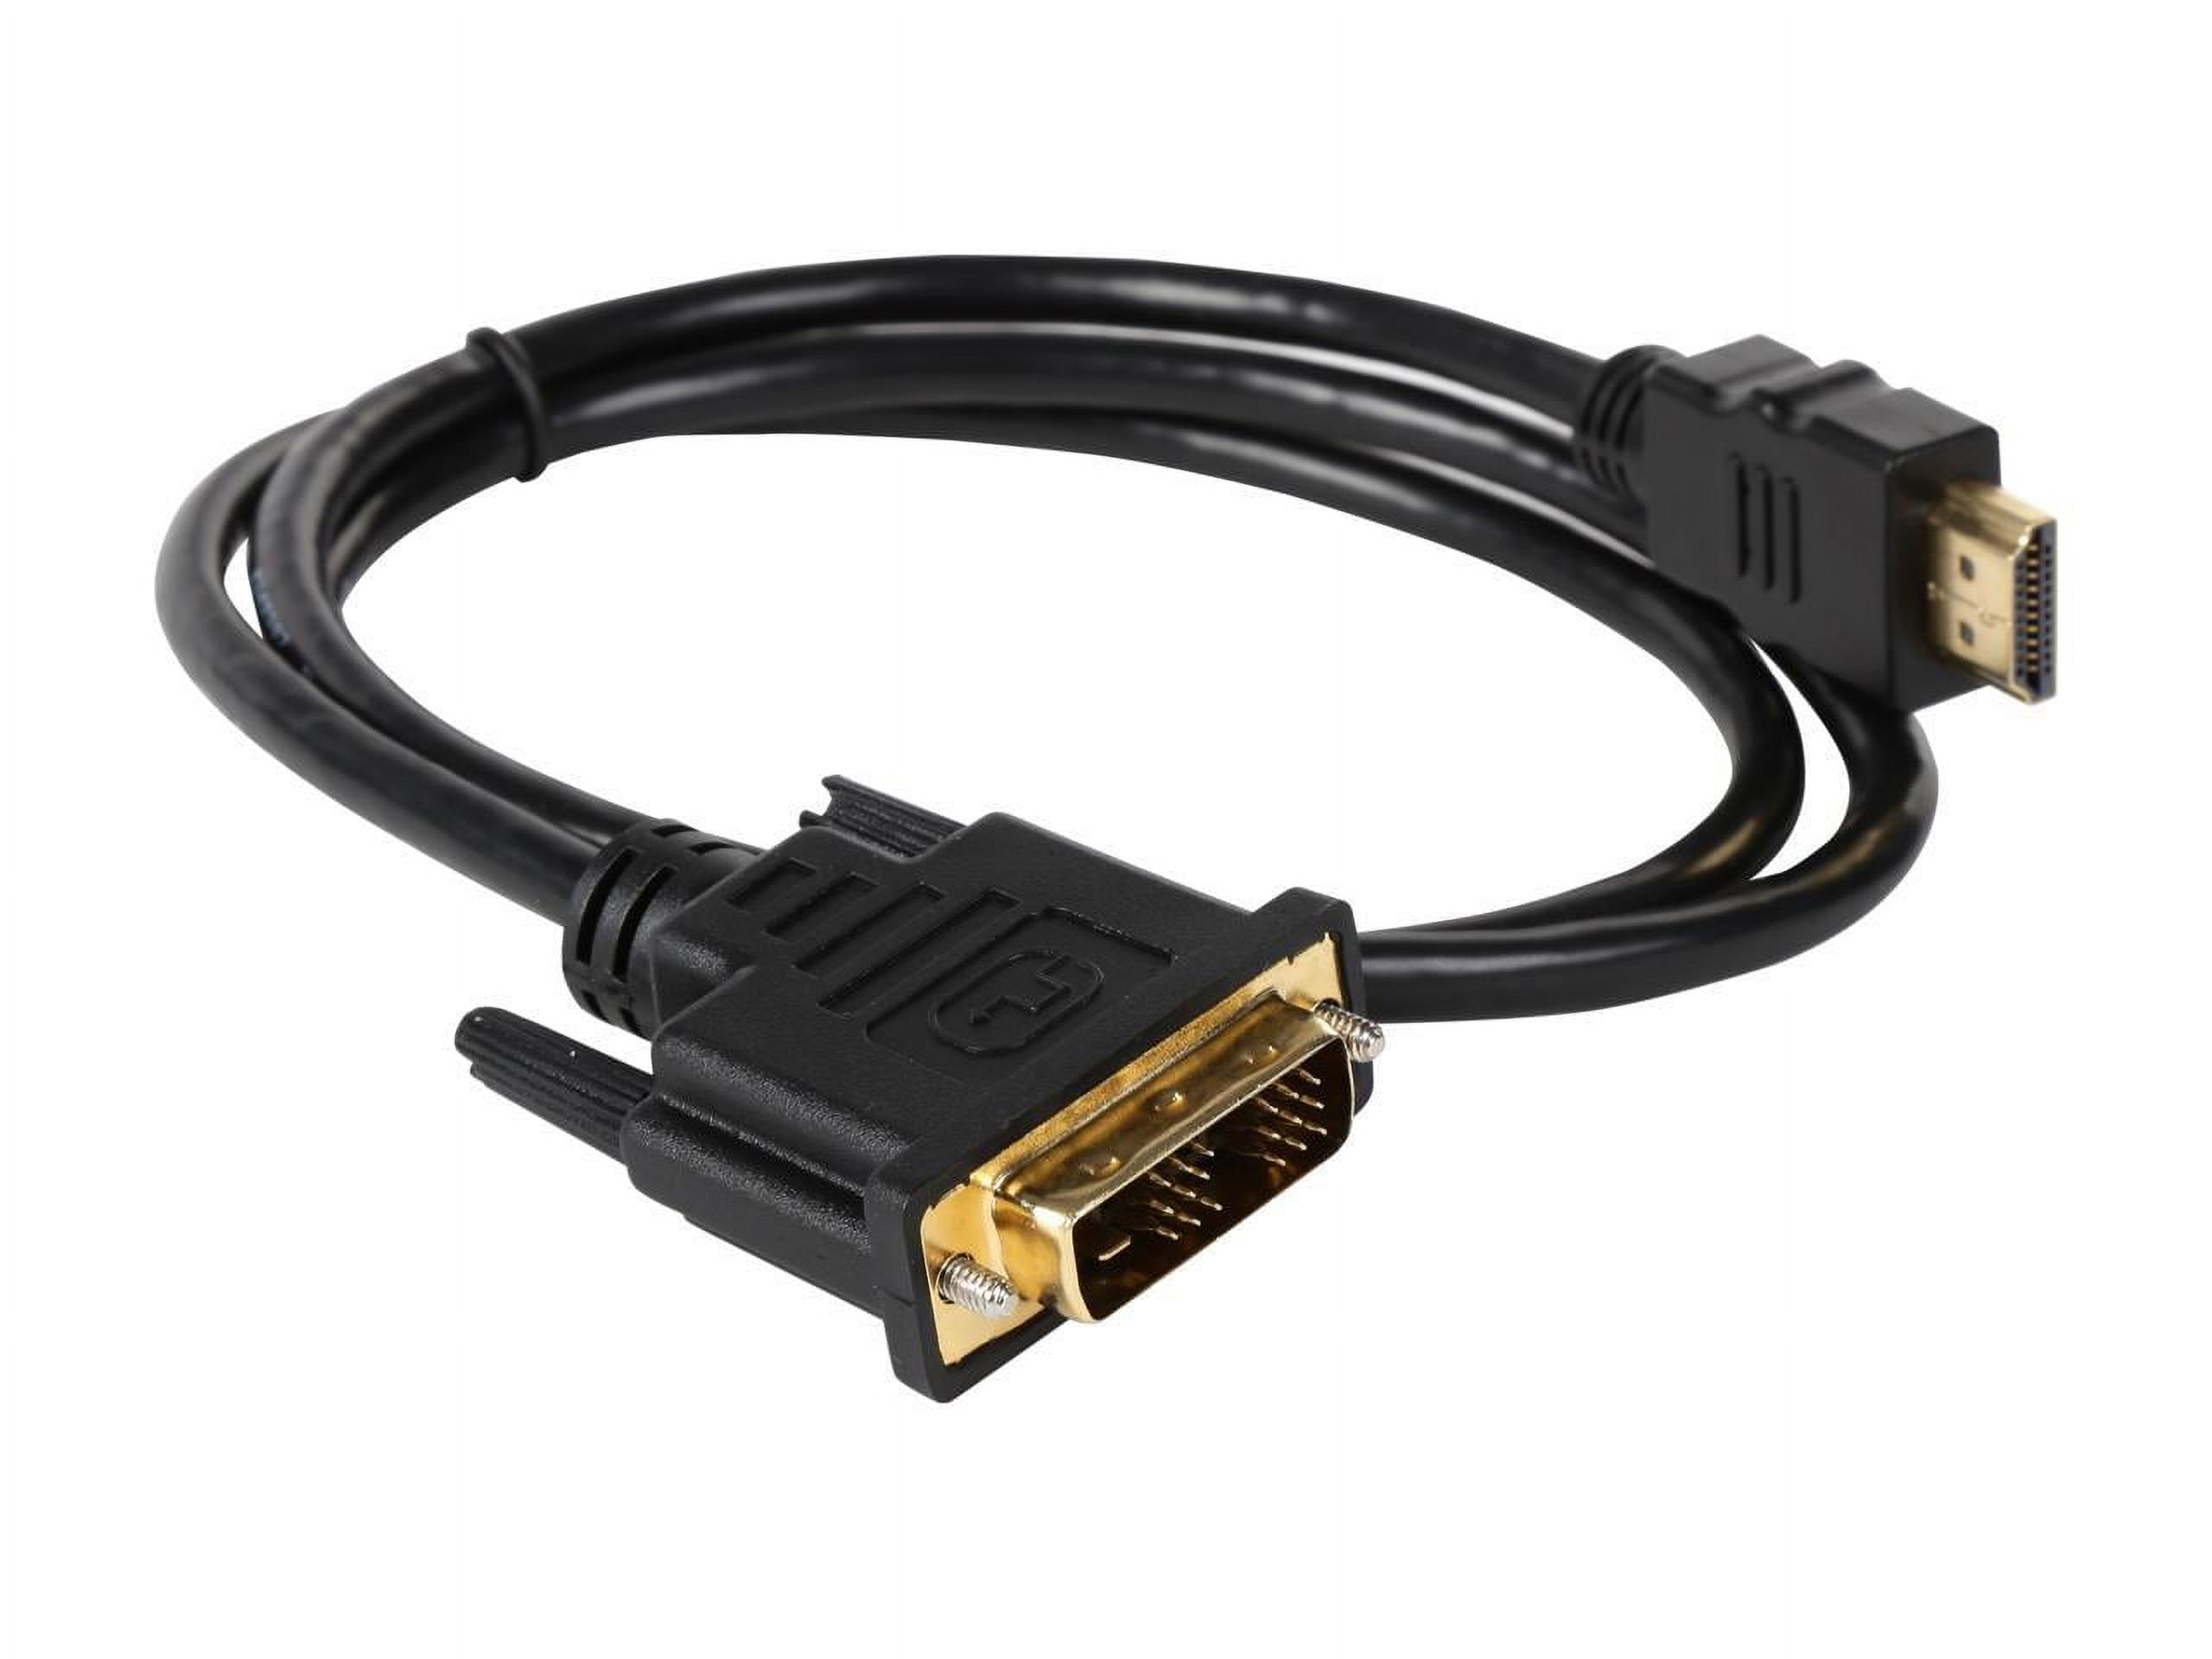 Tripp Lite P566-003 HDMI to DVI Cable, Digital Monitor Adapter Cable (HDMI to DVI D M/M), 1080P, 3 ft. - image 2 of 3